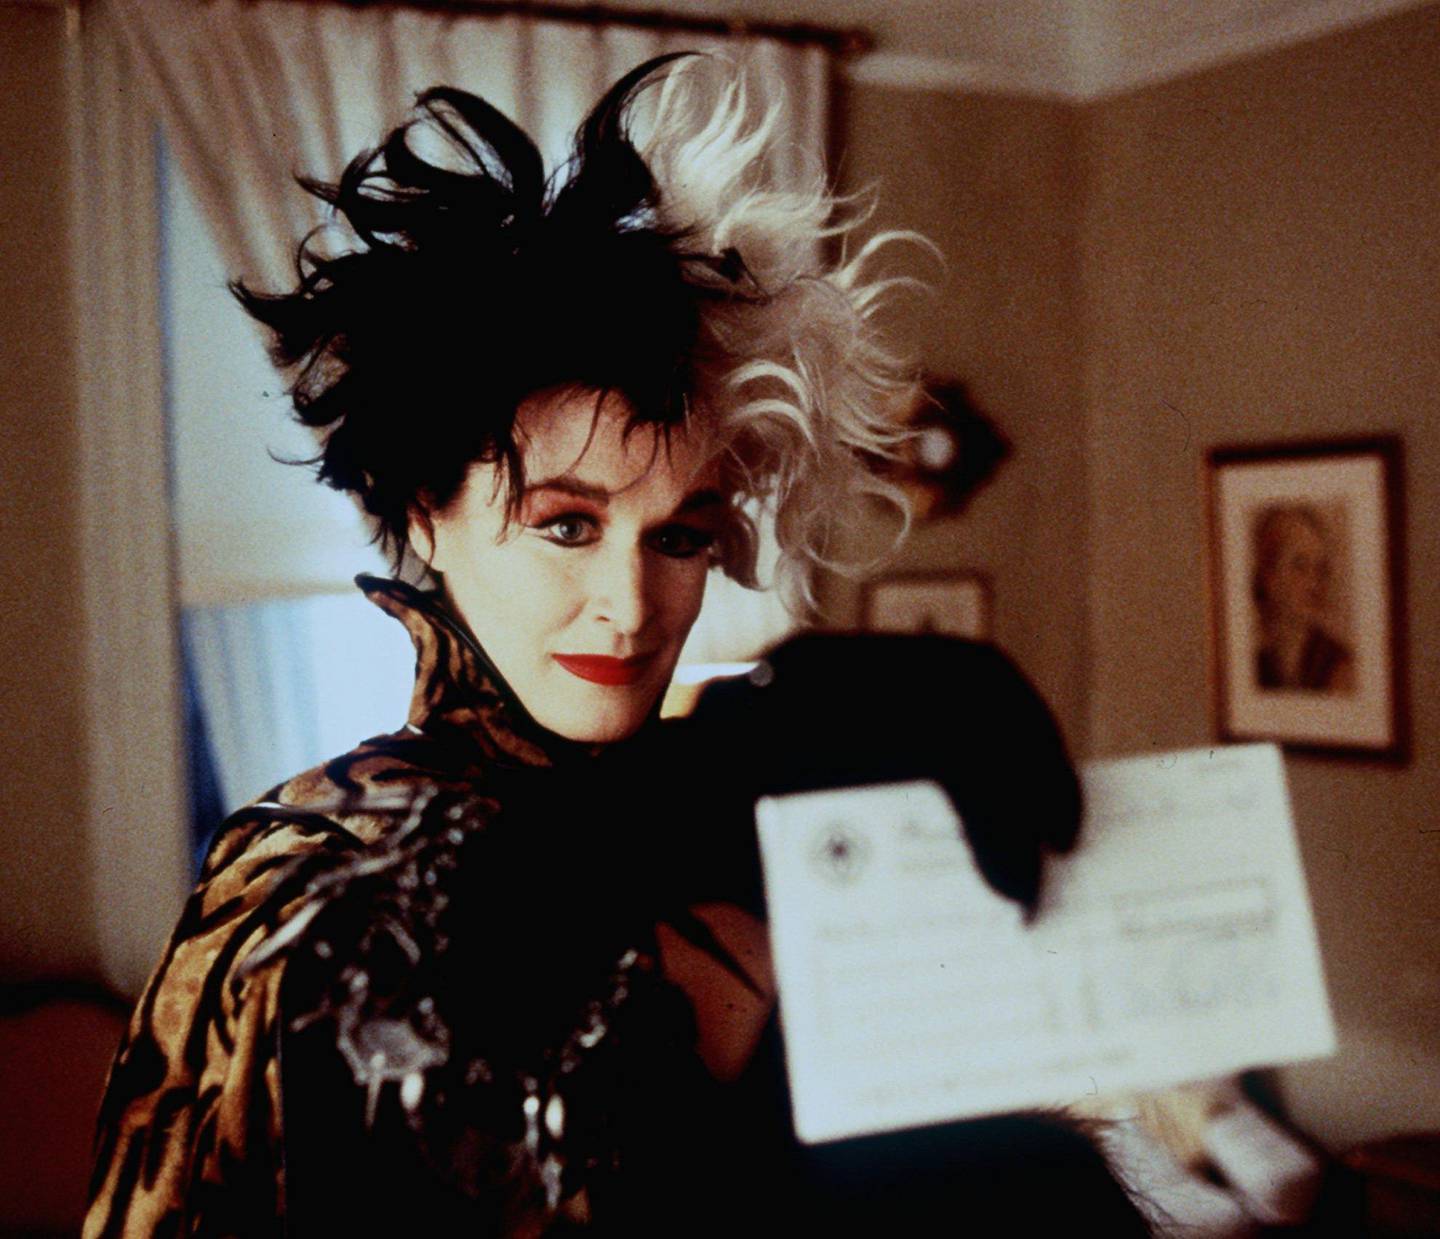 
FILE--Glenn Close is seen in her role as Cruella De Vil in the Walt Disney Pictures' remake of "101 Dalmatians." Disney plans a sequel to be called ``102 Dalmatians,'' Daily Variety reported Friday, Jan. 29, 1999. Disney hopes Close will return for an encore performance of the pup-nabbing Cruella. (AP Photo/Walt Disney Pictures, Clive Coote)